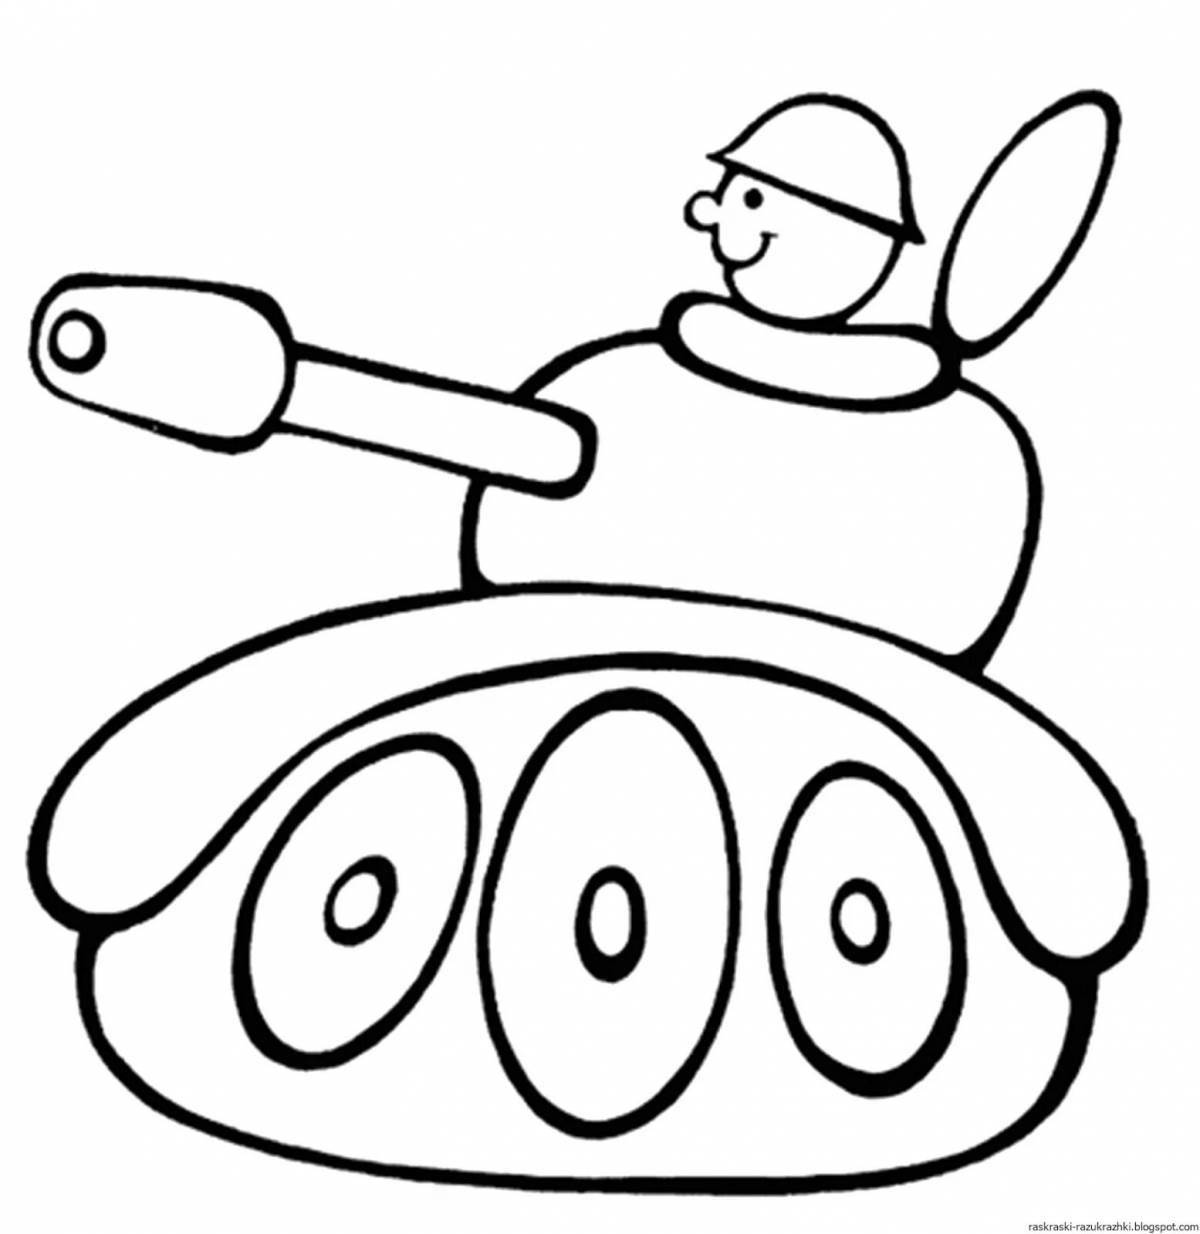 Tank drawing for kids #7